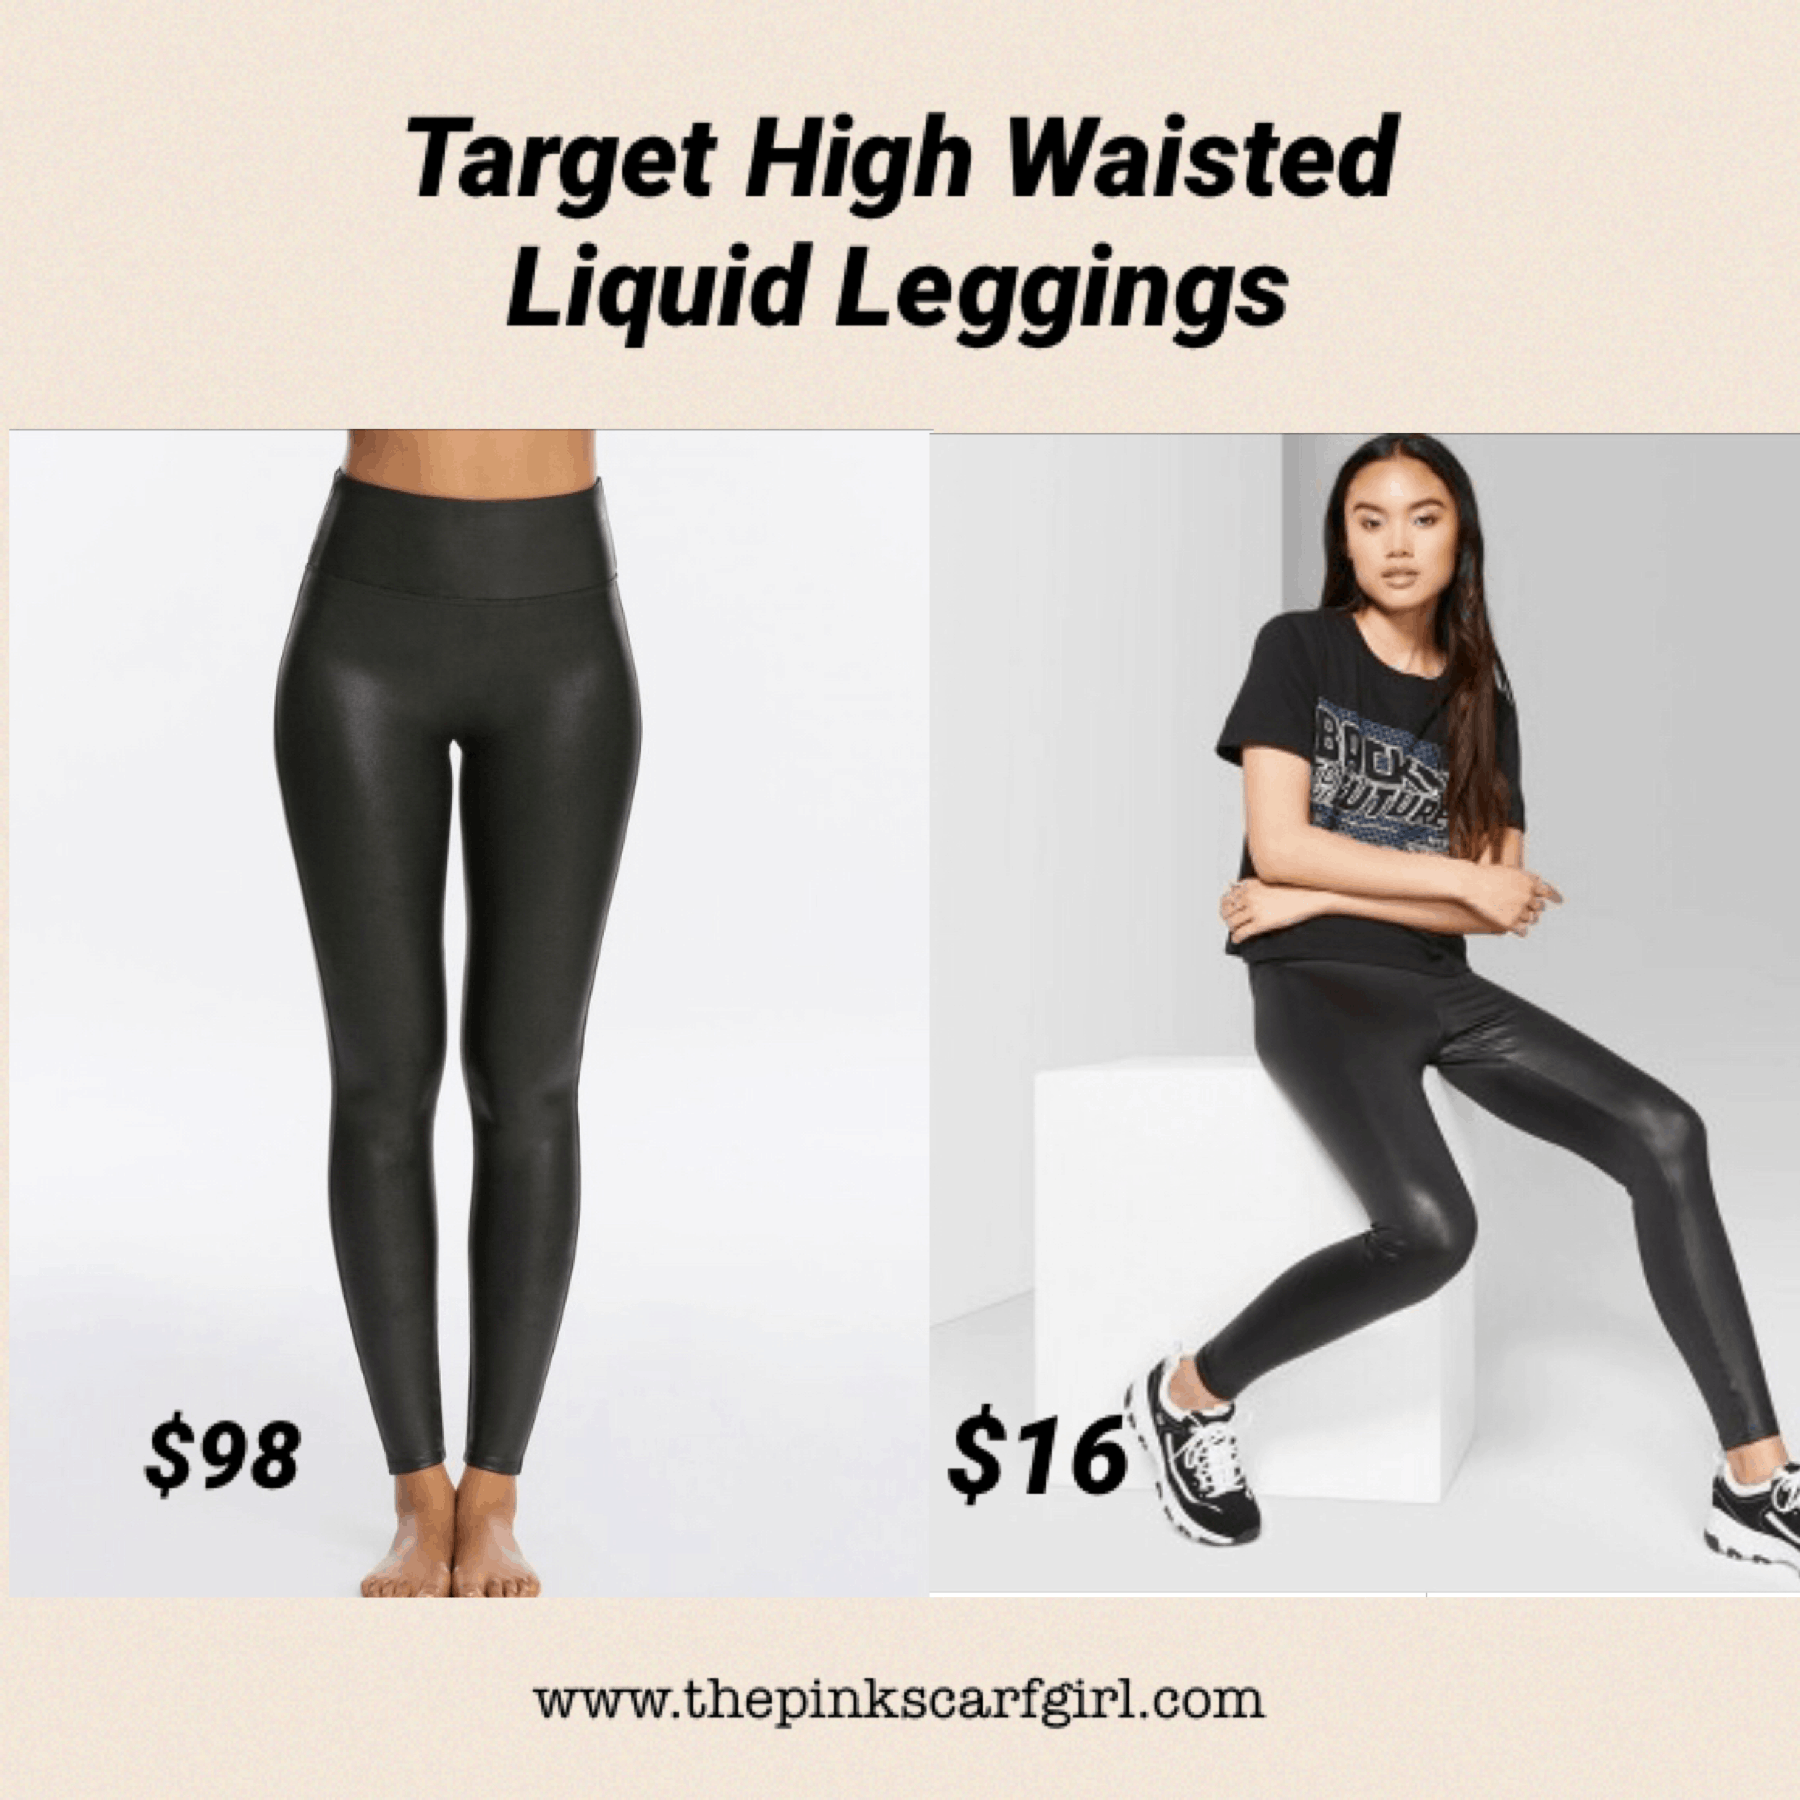 Can You Wear Leggings While Working At Target Stores